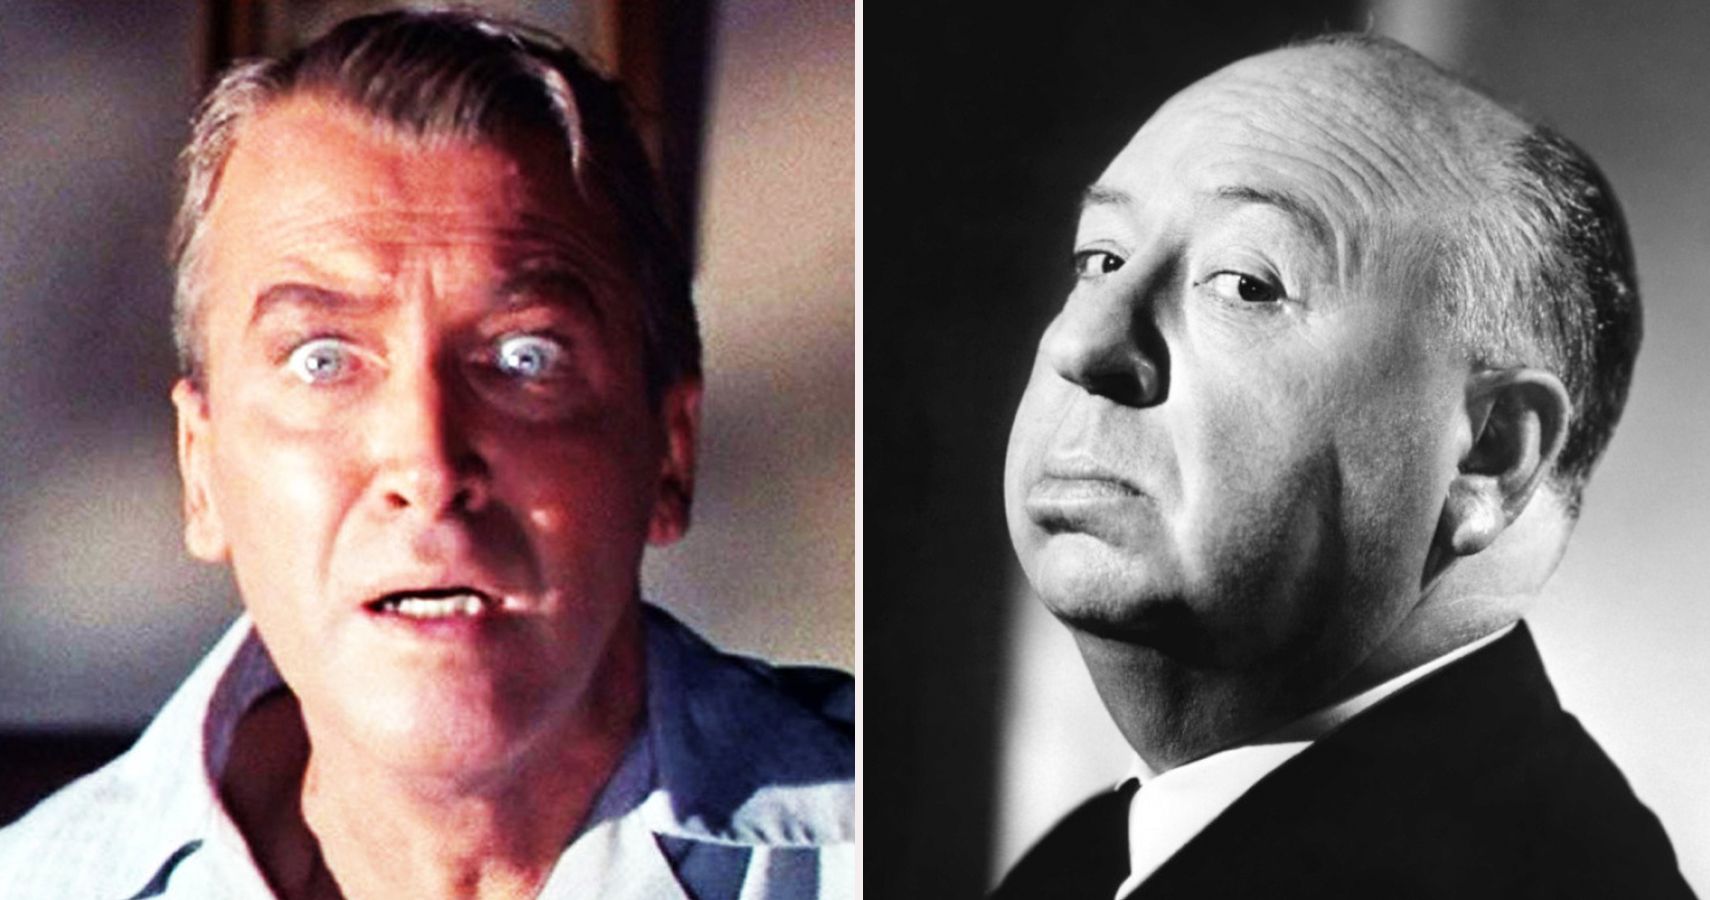 10 Best Quotes From Alfred Hitchcock Movies RELATED Alfred Hitchcock His 5 Best (And 5 Worst) Films According To IMDb RELATED 10 Best Alfred Hitchcock Movie Posters Ranked